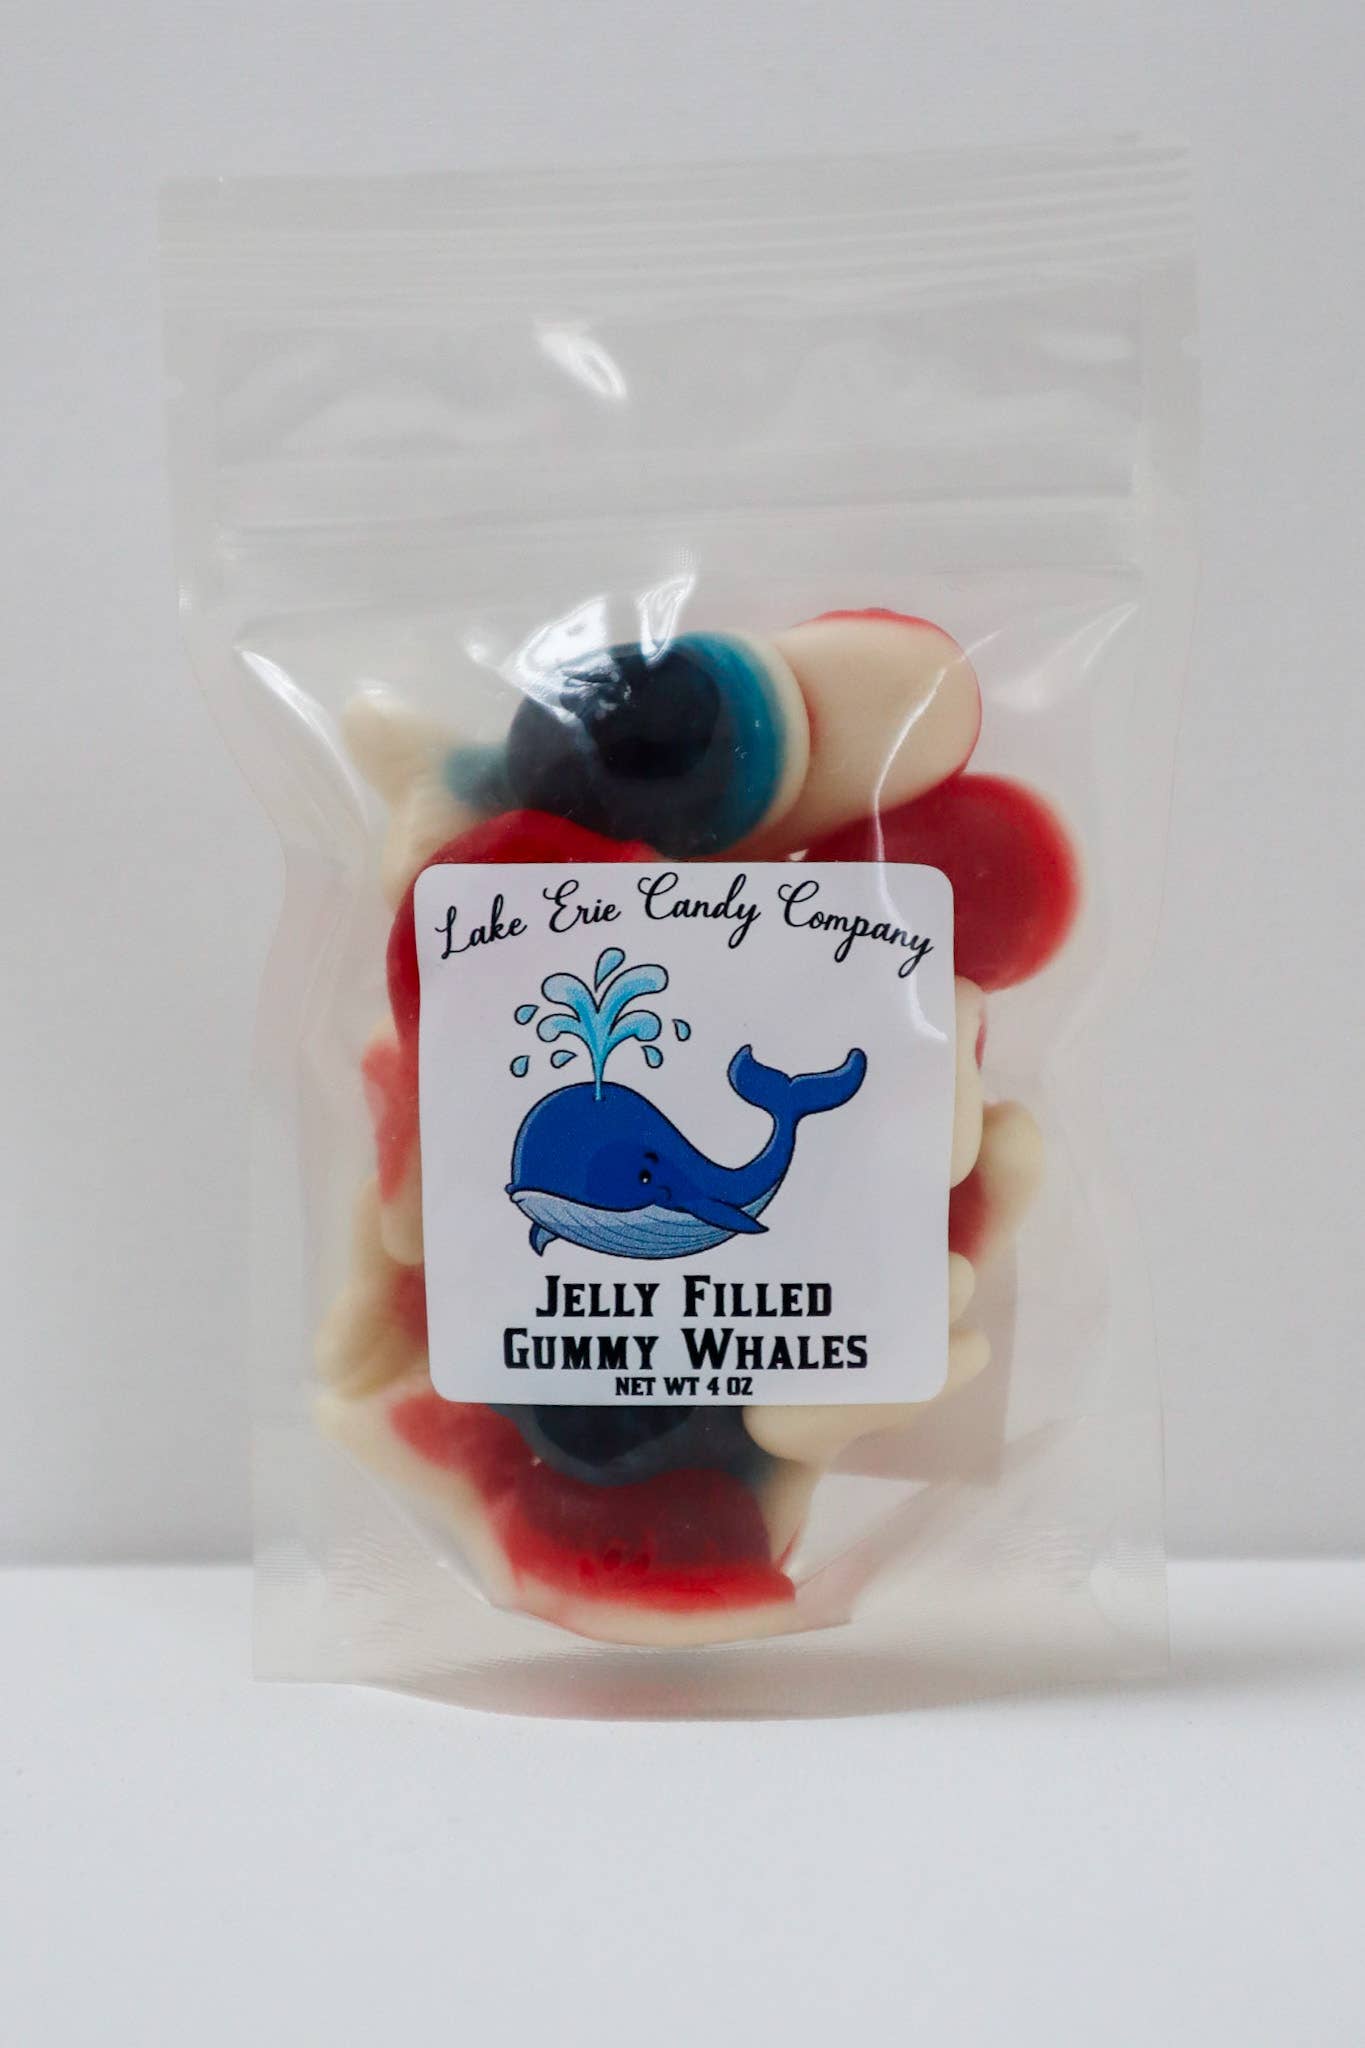 Jelly Filled Gummy Whales